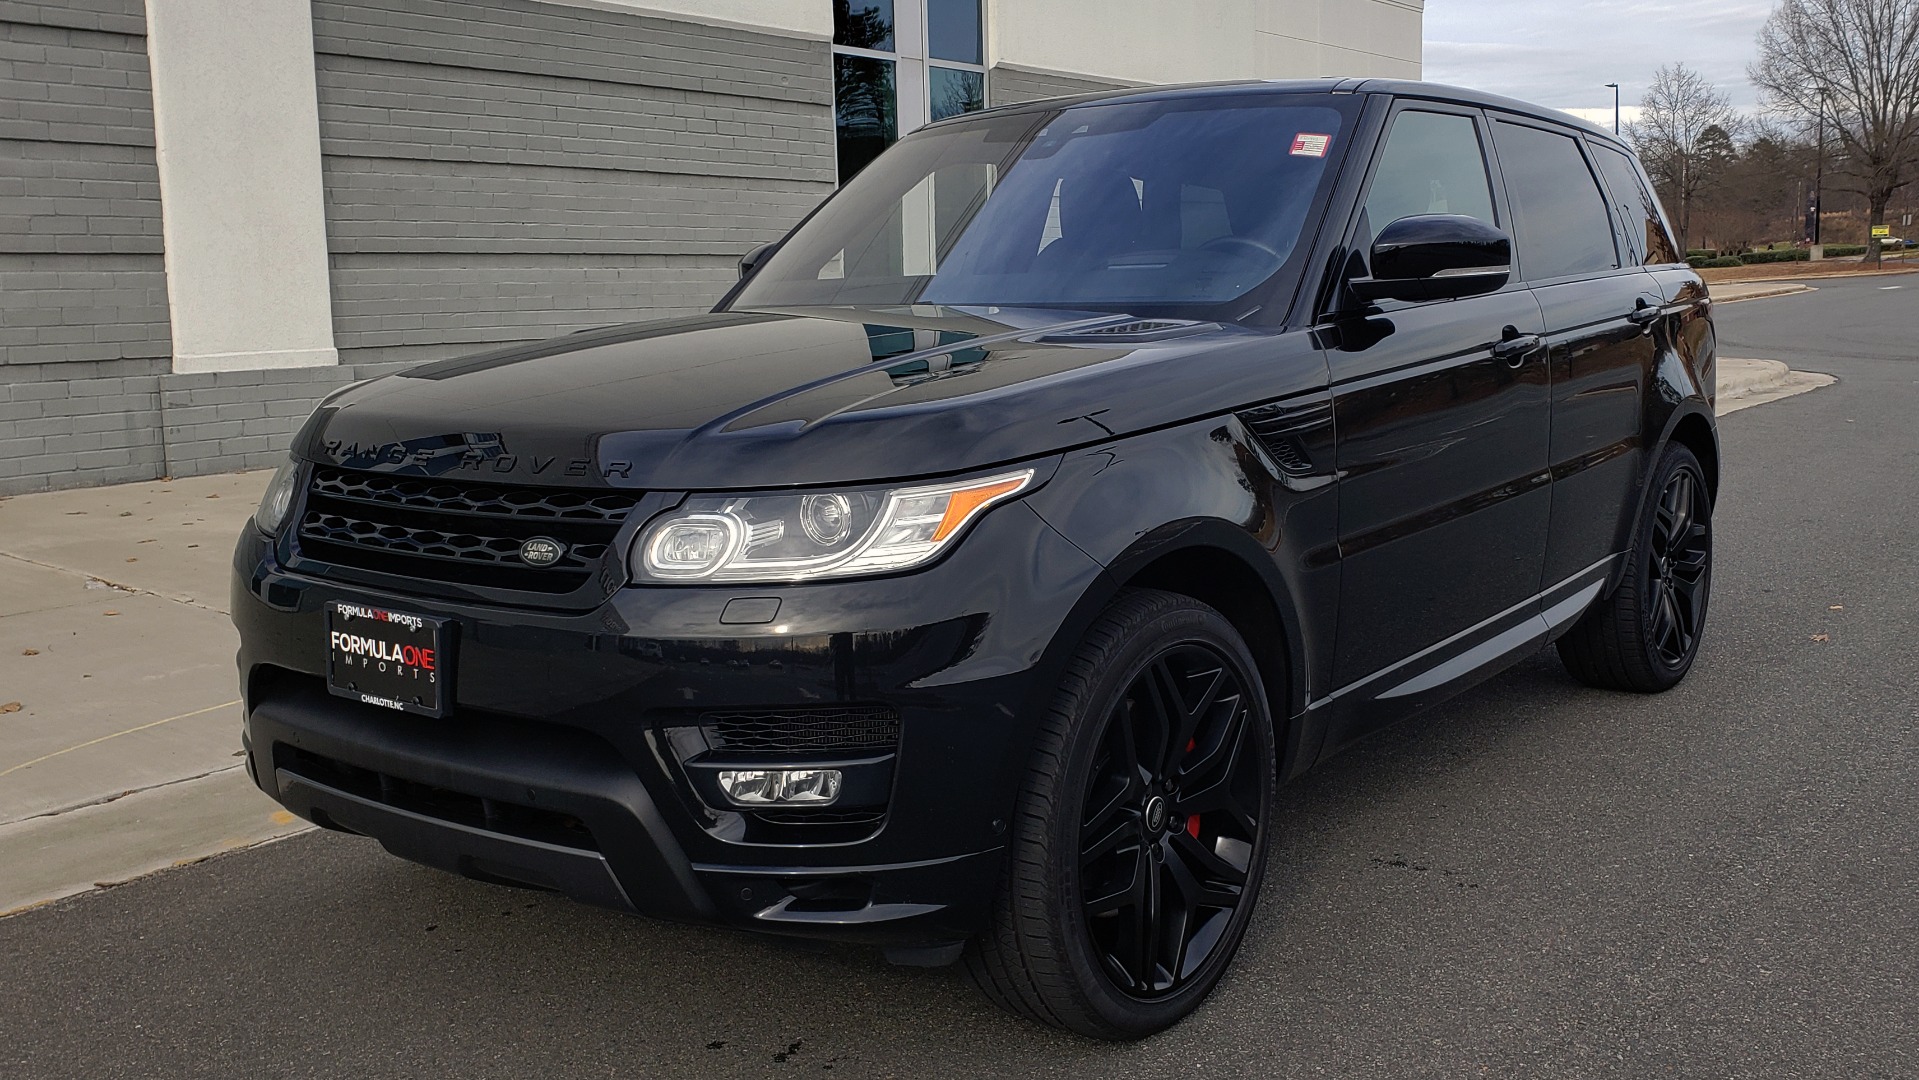 Used 2017 Land Rover RANGE ROVER SPORT HSE DYNAMIC / SC V6 / NAV / MERIDIAN / PANO-ROOF / REARVIEW for sale Sold at Formula Imports in Charlotte NC 28227 1